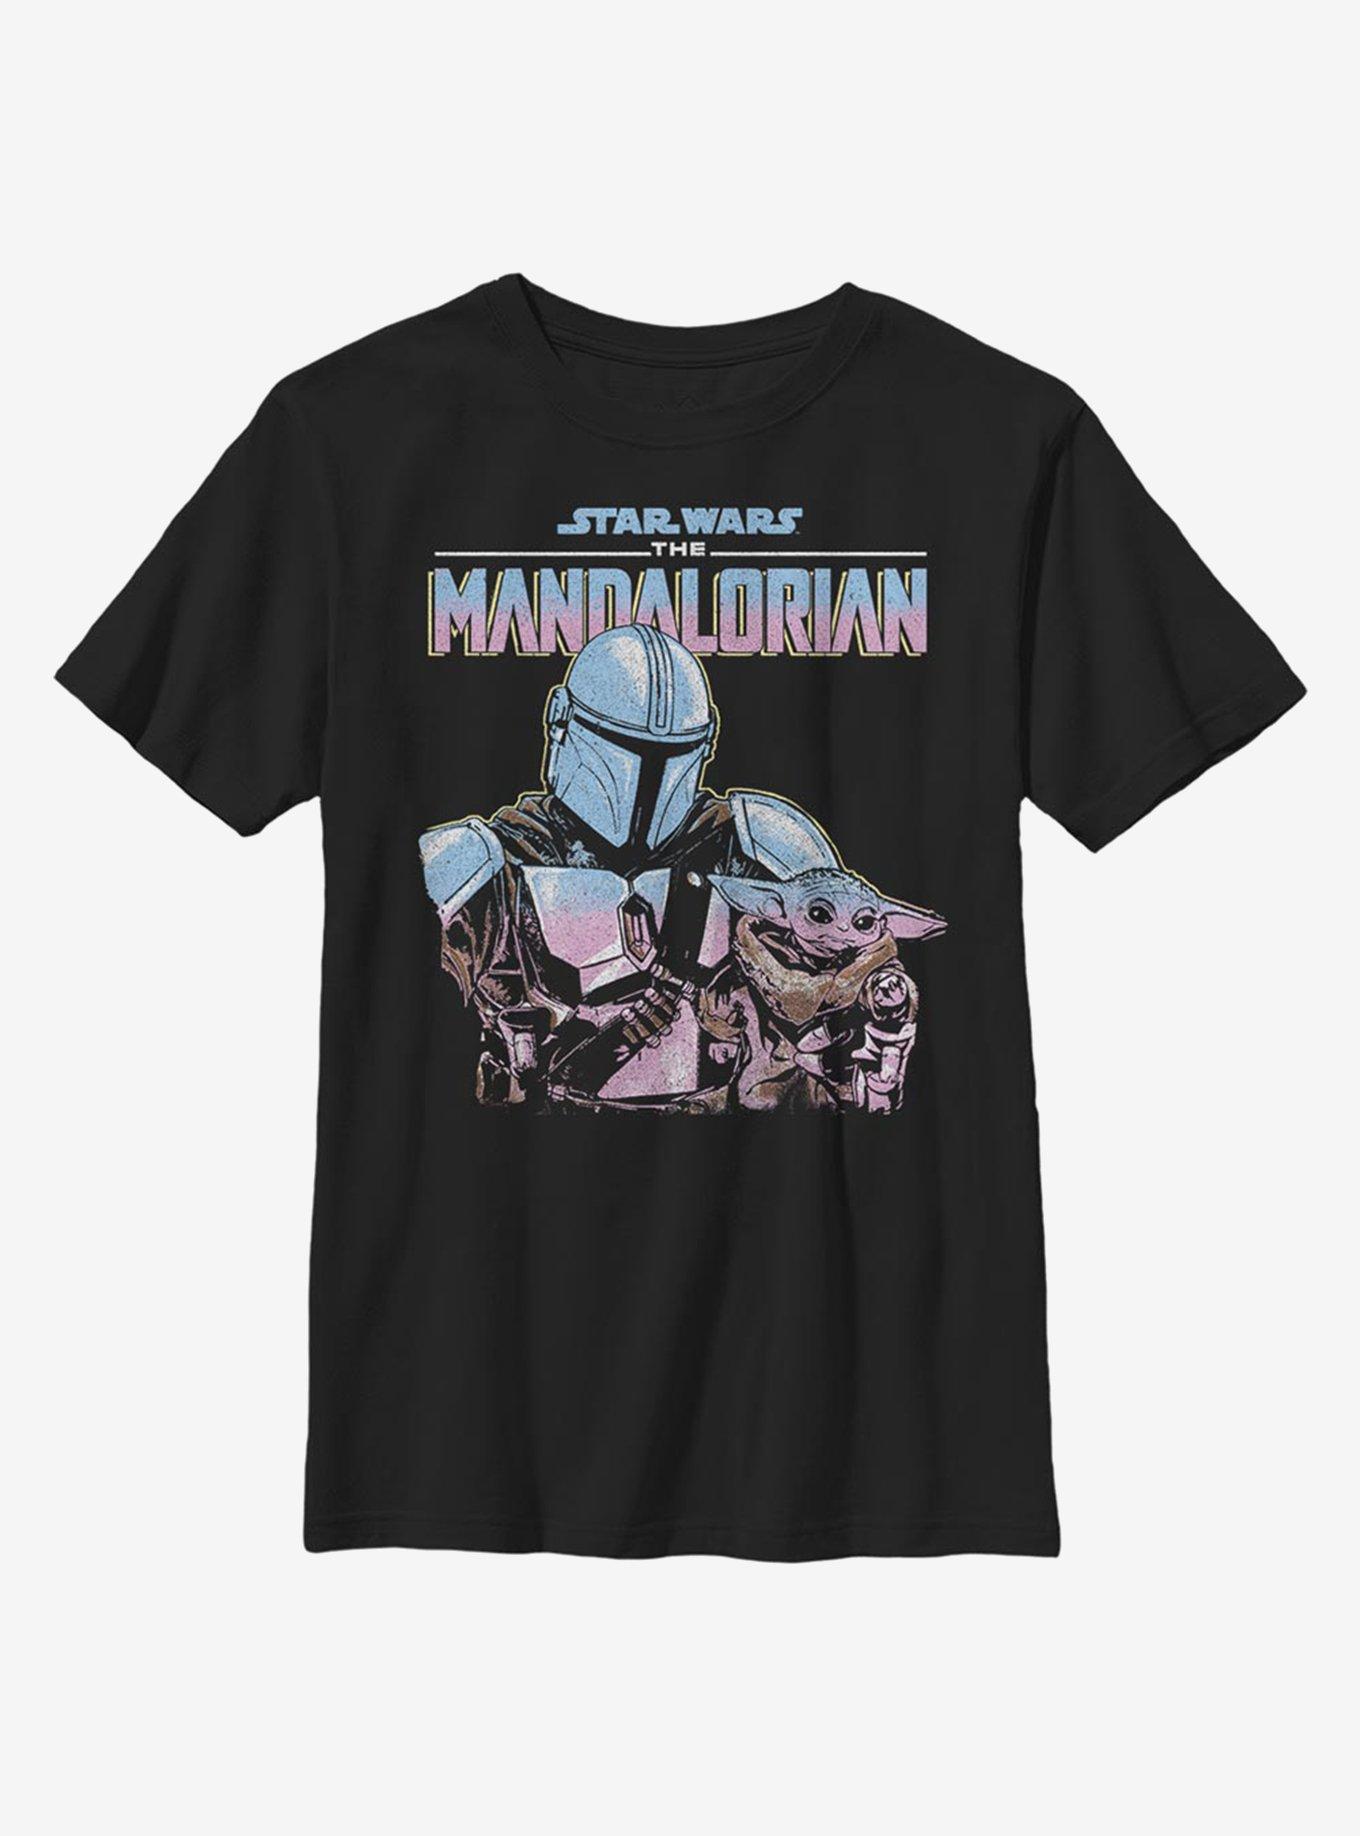 Star Wars The Mandalorian The Child Lone Wolf Youth T-Shirt, BLACK, hi-res